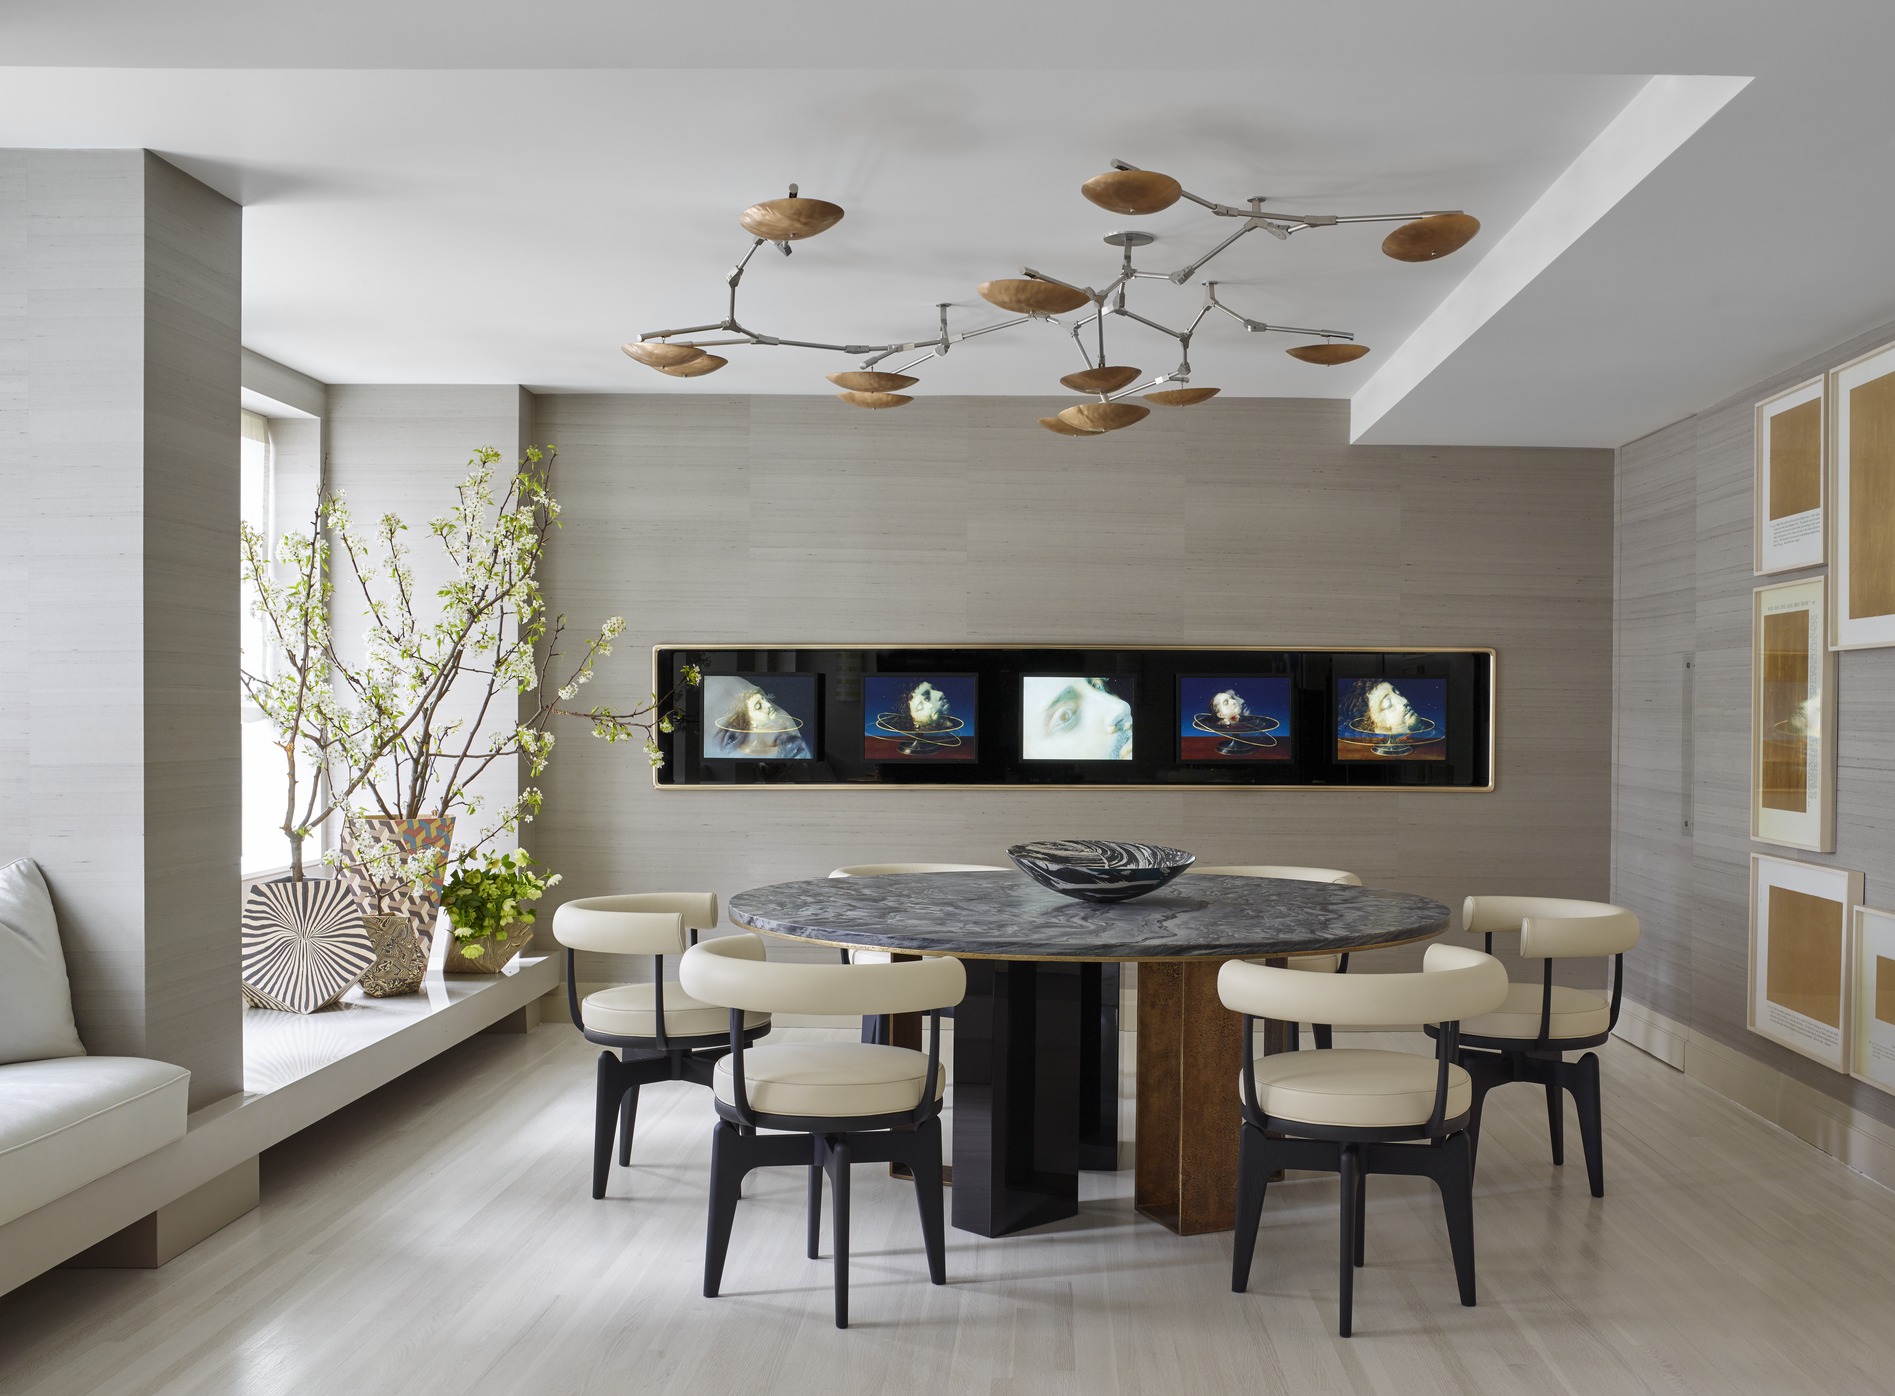 The necessity of modern dining room